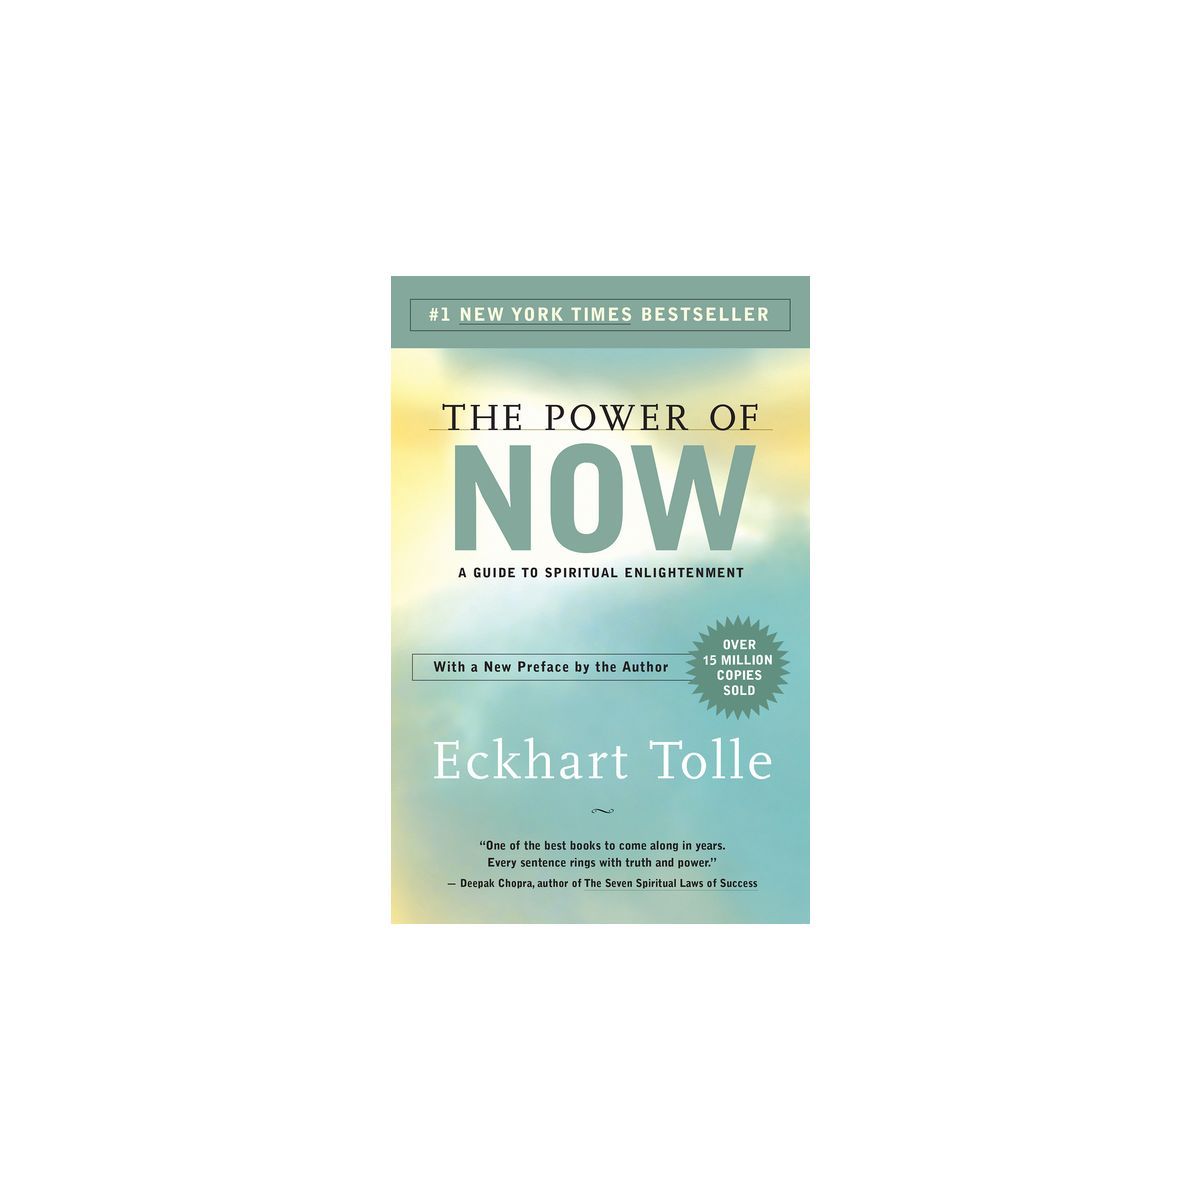 The Power of Now (Reprint) (Paperback) by Eckhart Tolle | Target